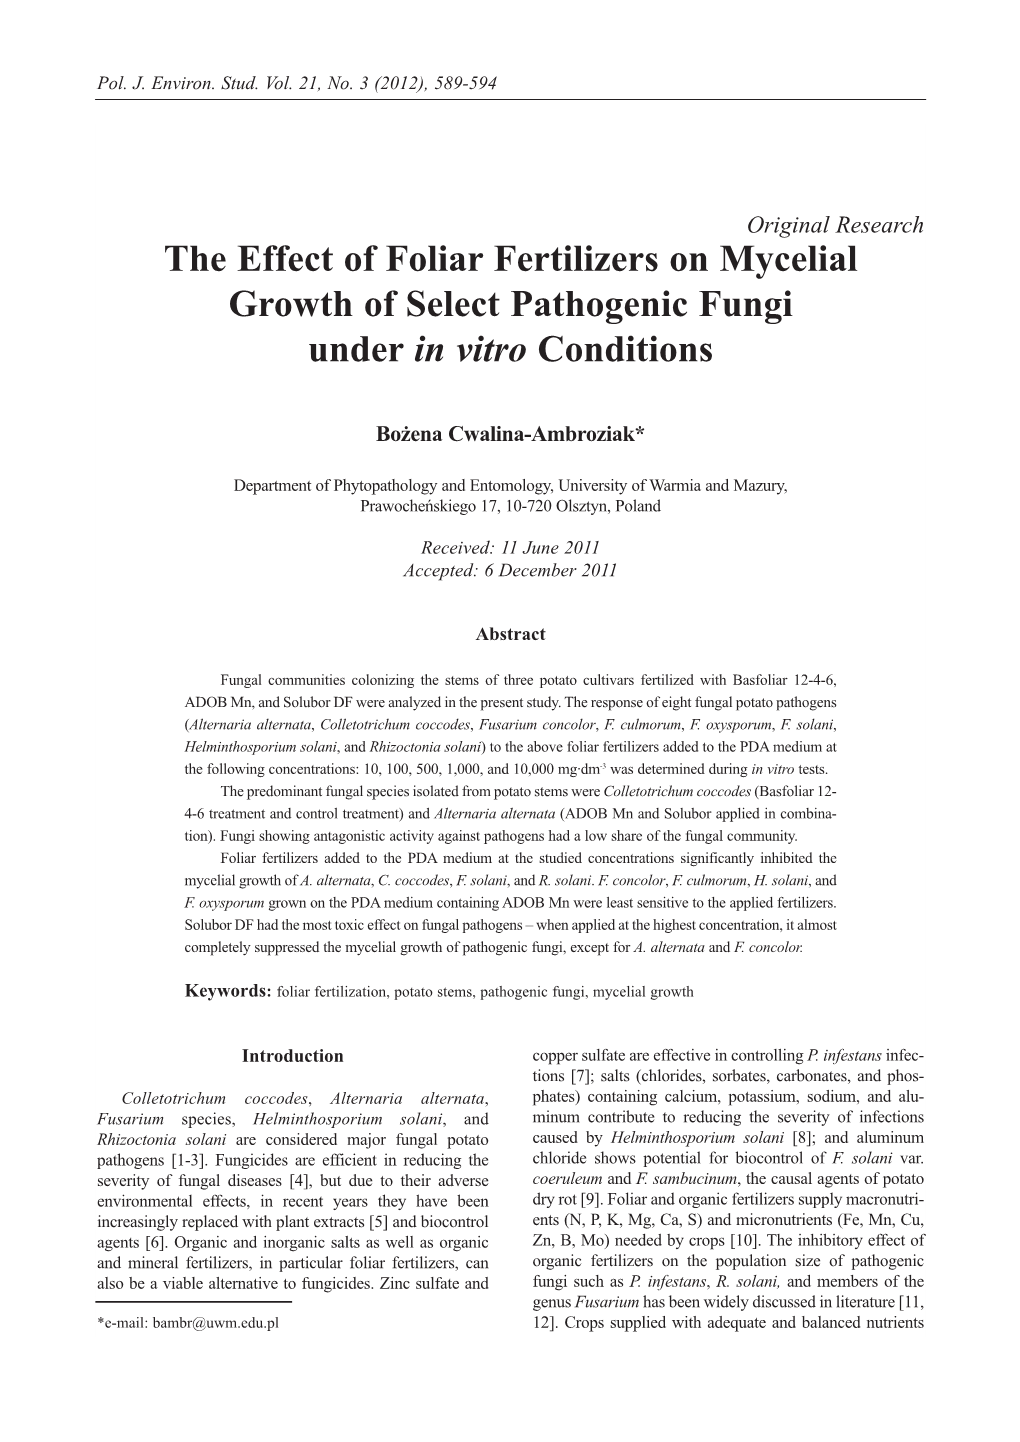 The Effect of Foliar Fertilizers on Mycelial Growth of Select Pathogenic Fungi Under in Vitro Conditions